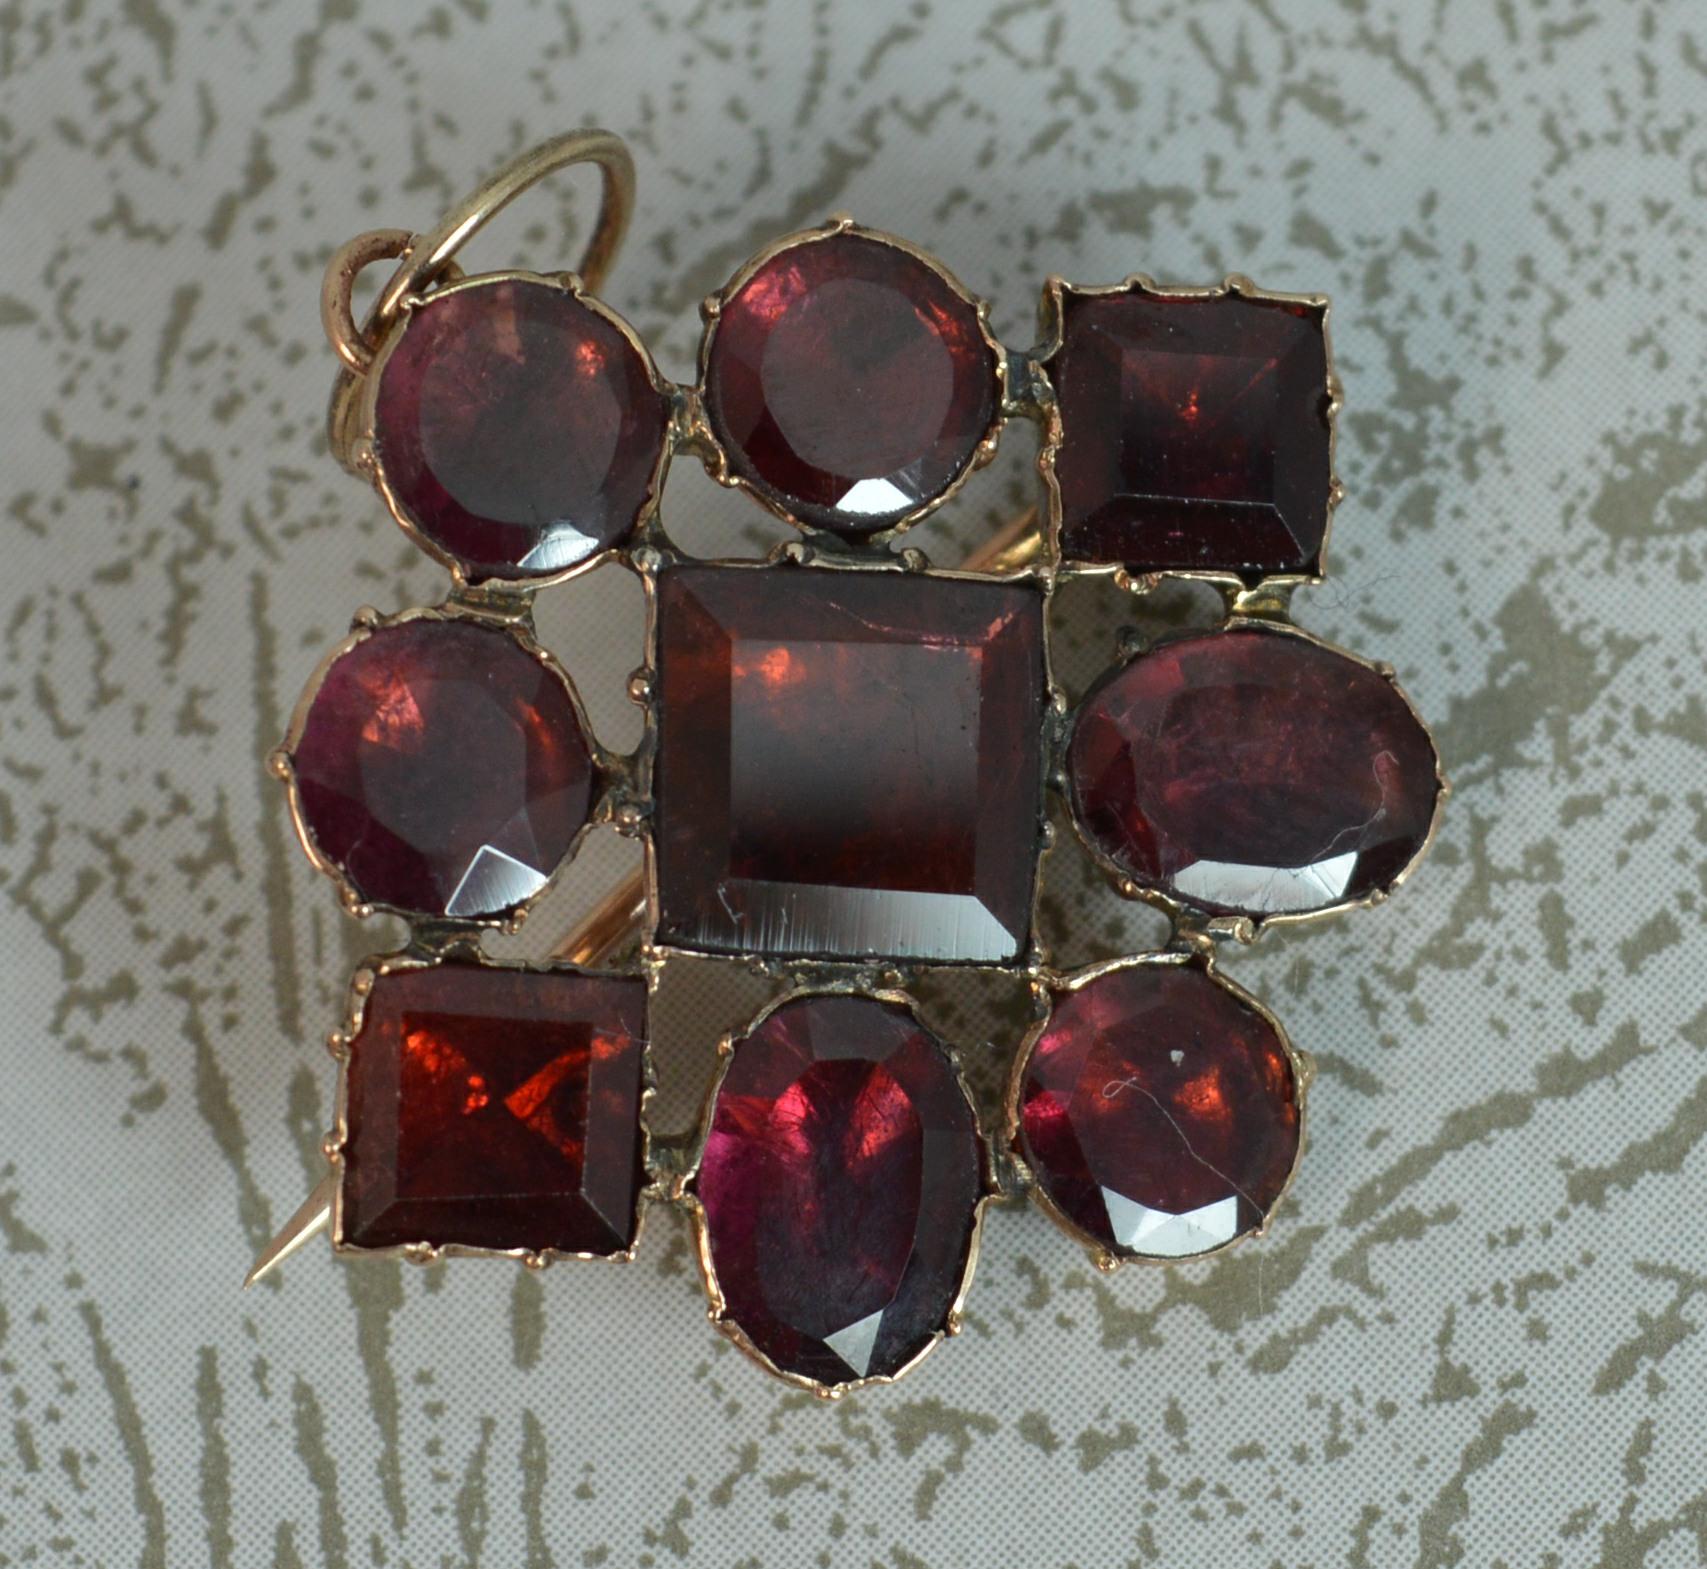 A rare true Georgian period pendant, circa 1770.

Solid 9 carat rose gold example with garnets.

Flat round, oval and square cut garnets in closed foiled back settings. 

CONDITION ; Excellent for age. Clean and polished. Securely set garnets. Issue